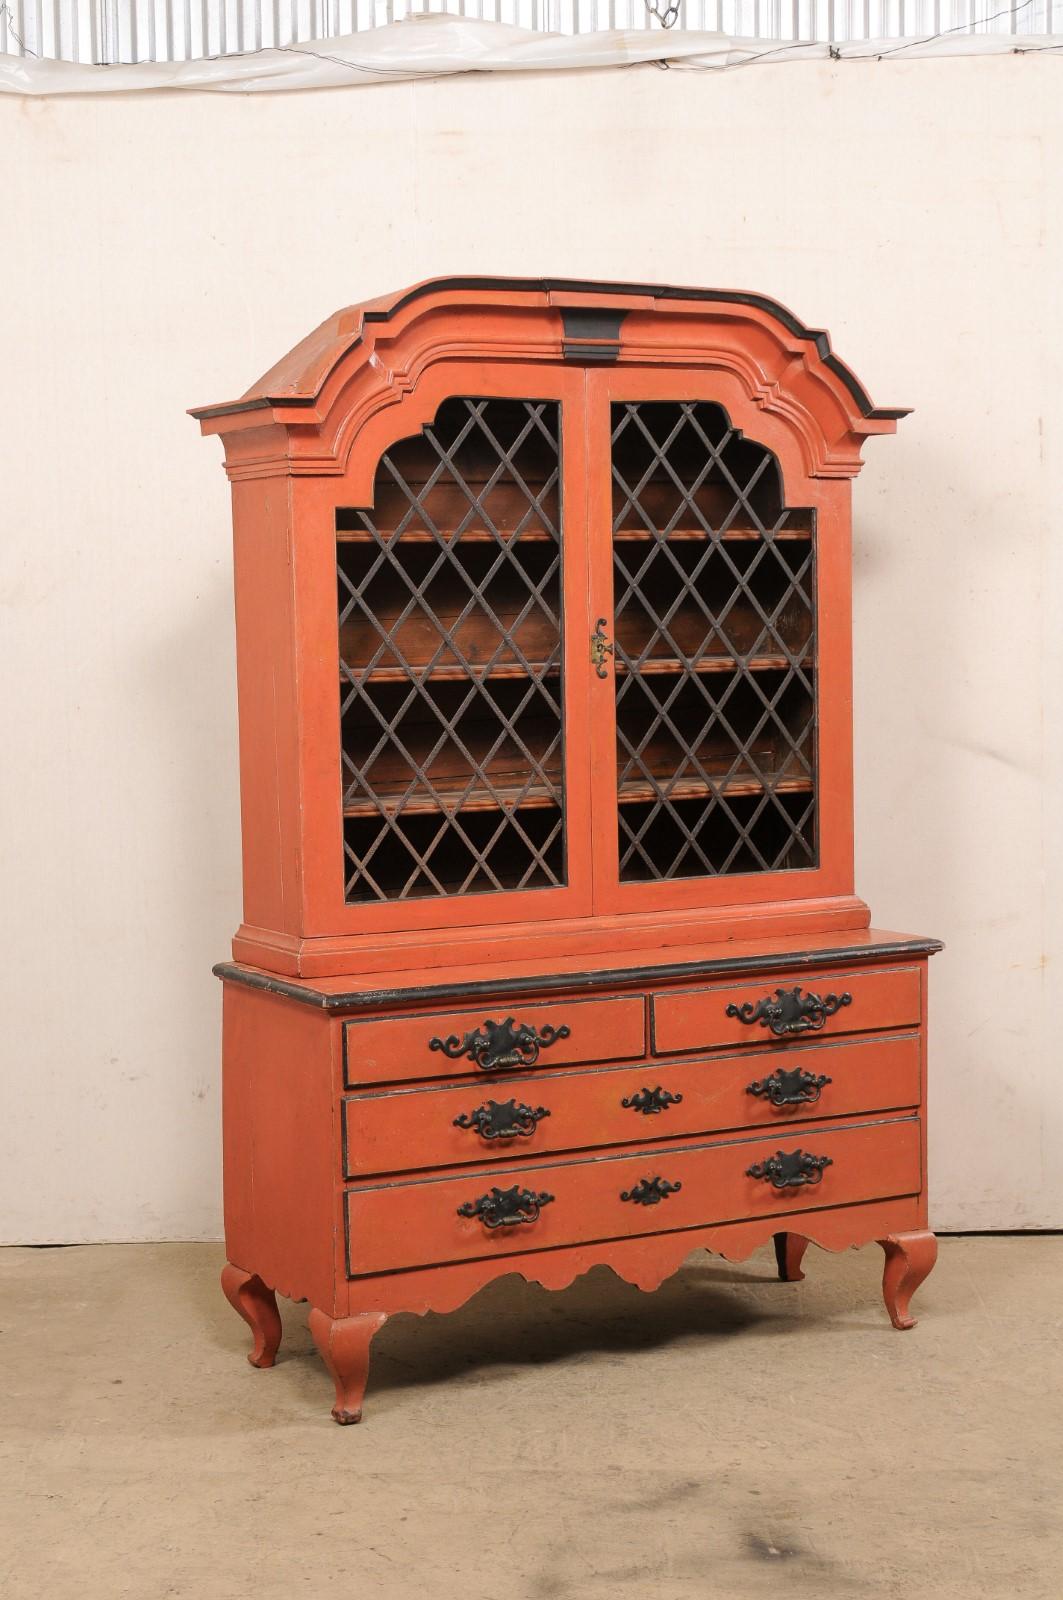 A Swedish Rococo painted wood display and storage cabinet from the 18th century. This antique cabinet from Sweden, which stands just over 7 feet in height, features a gracefully arched pediment bonnet comprised of layers of trim molding, crowning